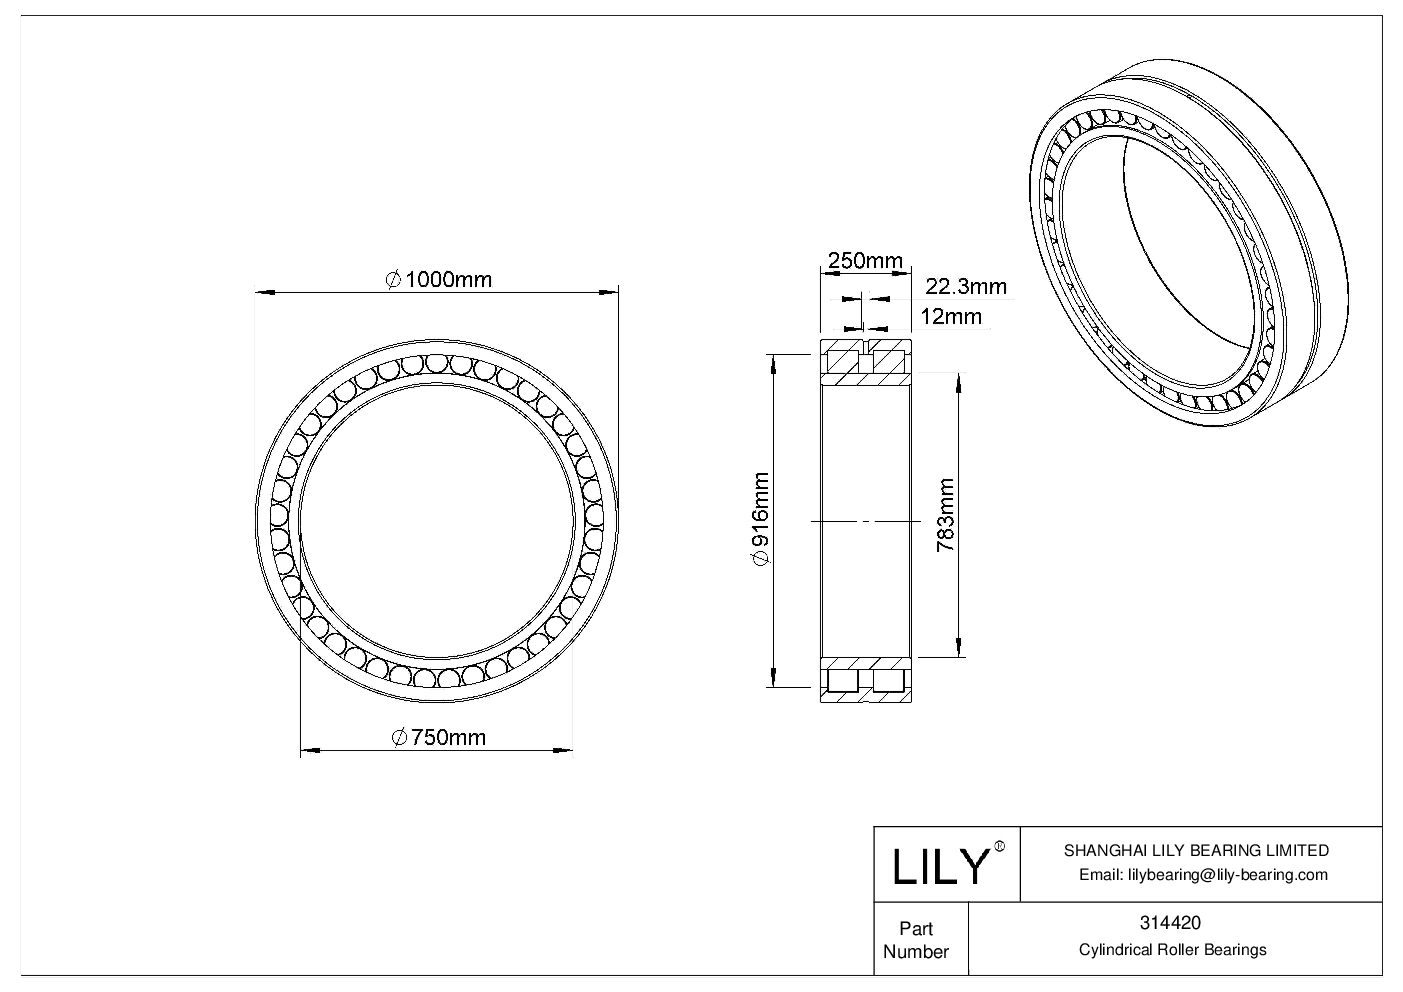 314420 Double Row Cylindrical Roller Bearings cad drawing